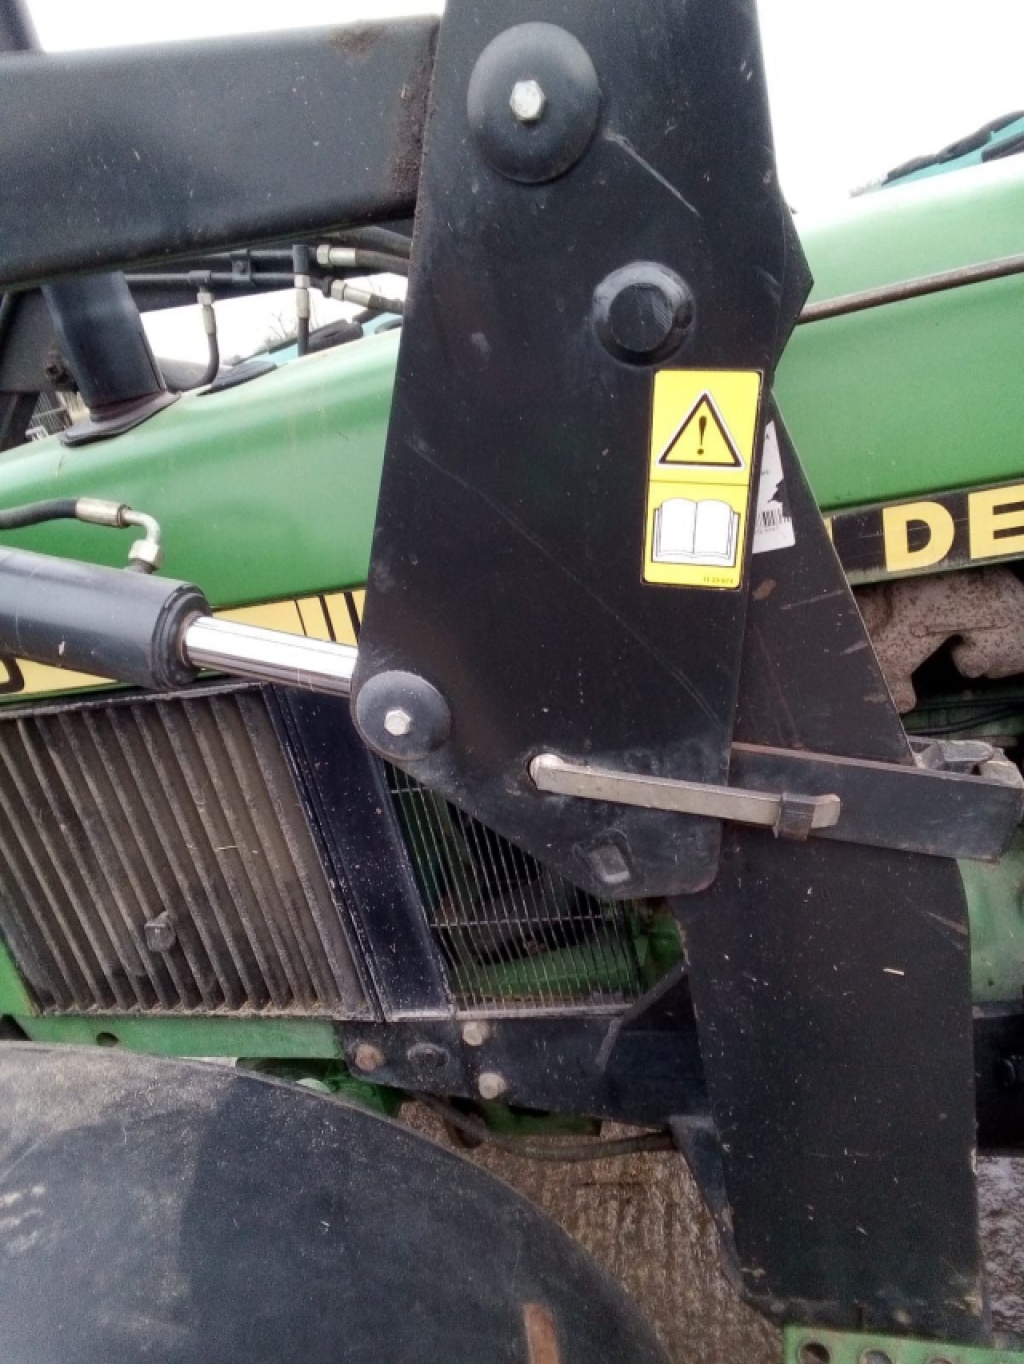 QUICKE Q940 COMPLETE LOADER TO FIT JOHN DEERE 2650 / 2850 *in excellent condition*